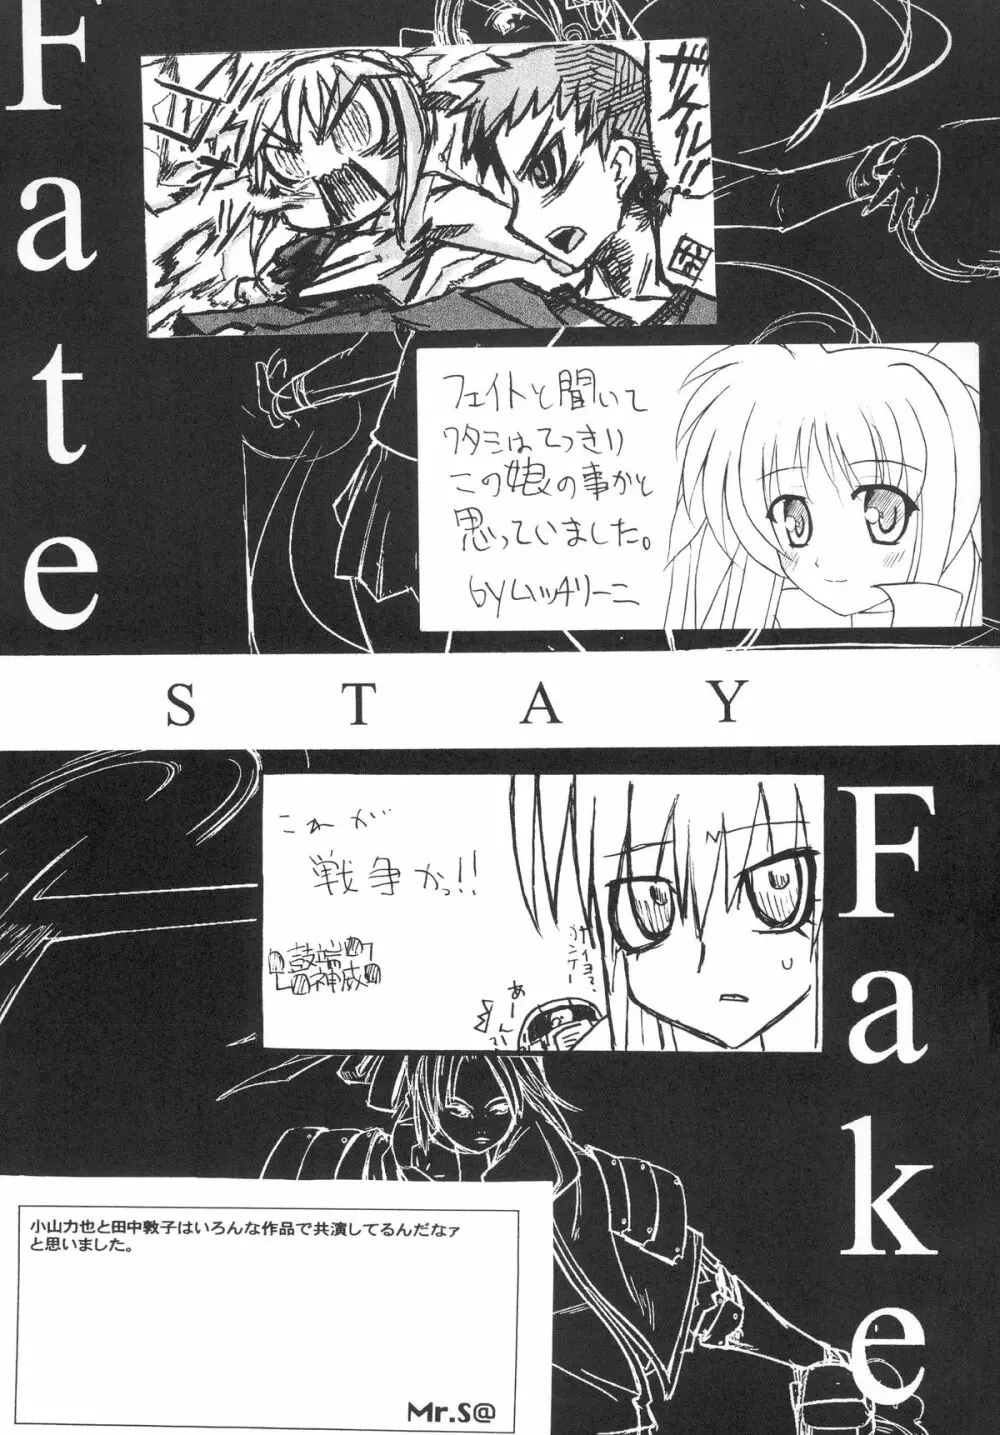 FATE STAY FAKE 28ページ